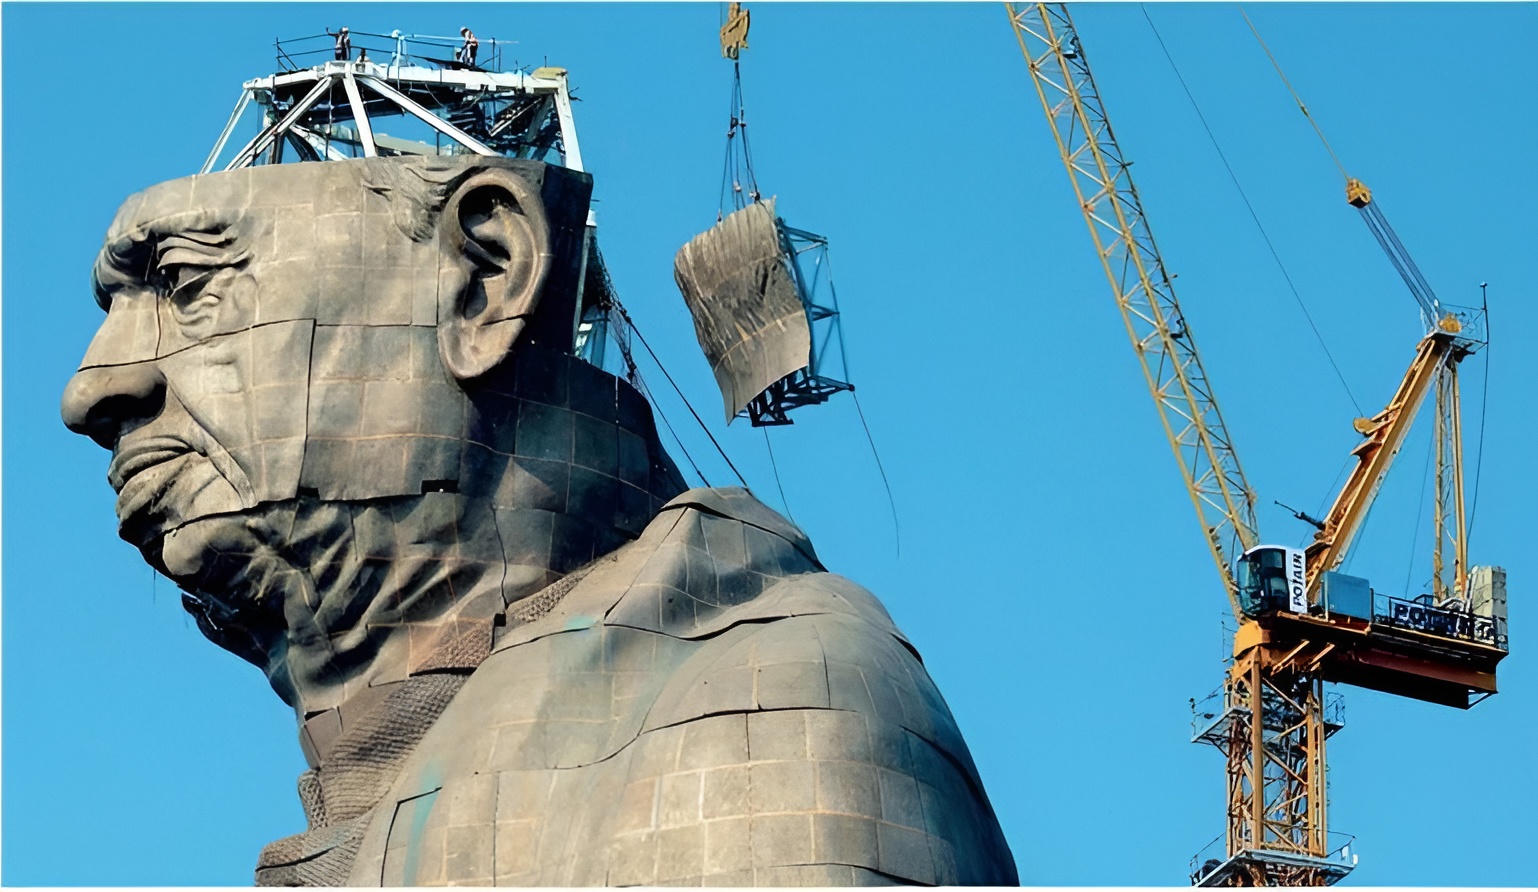 Statue of Unity construction phase